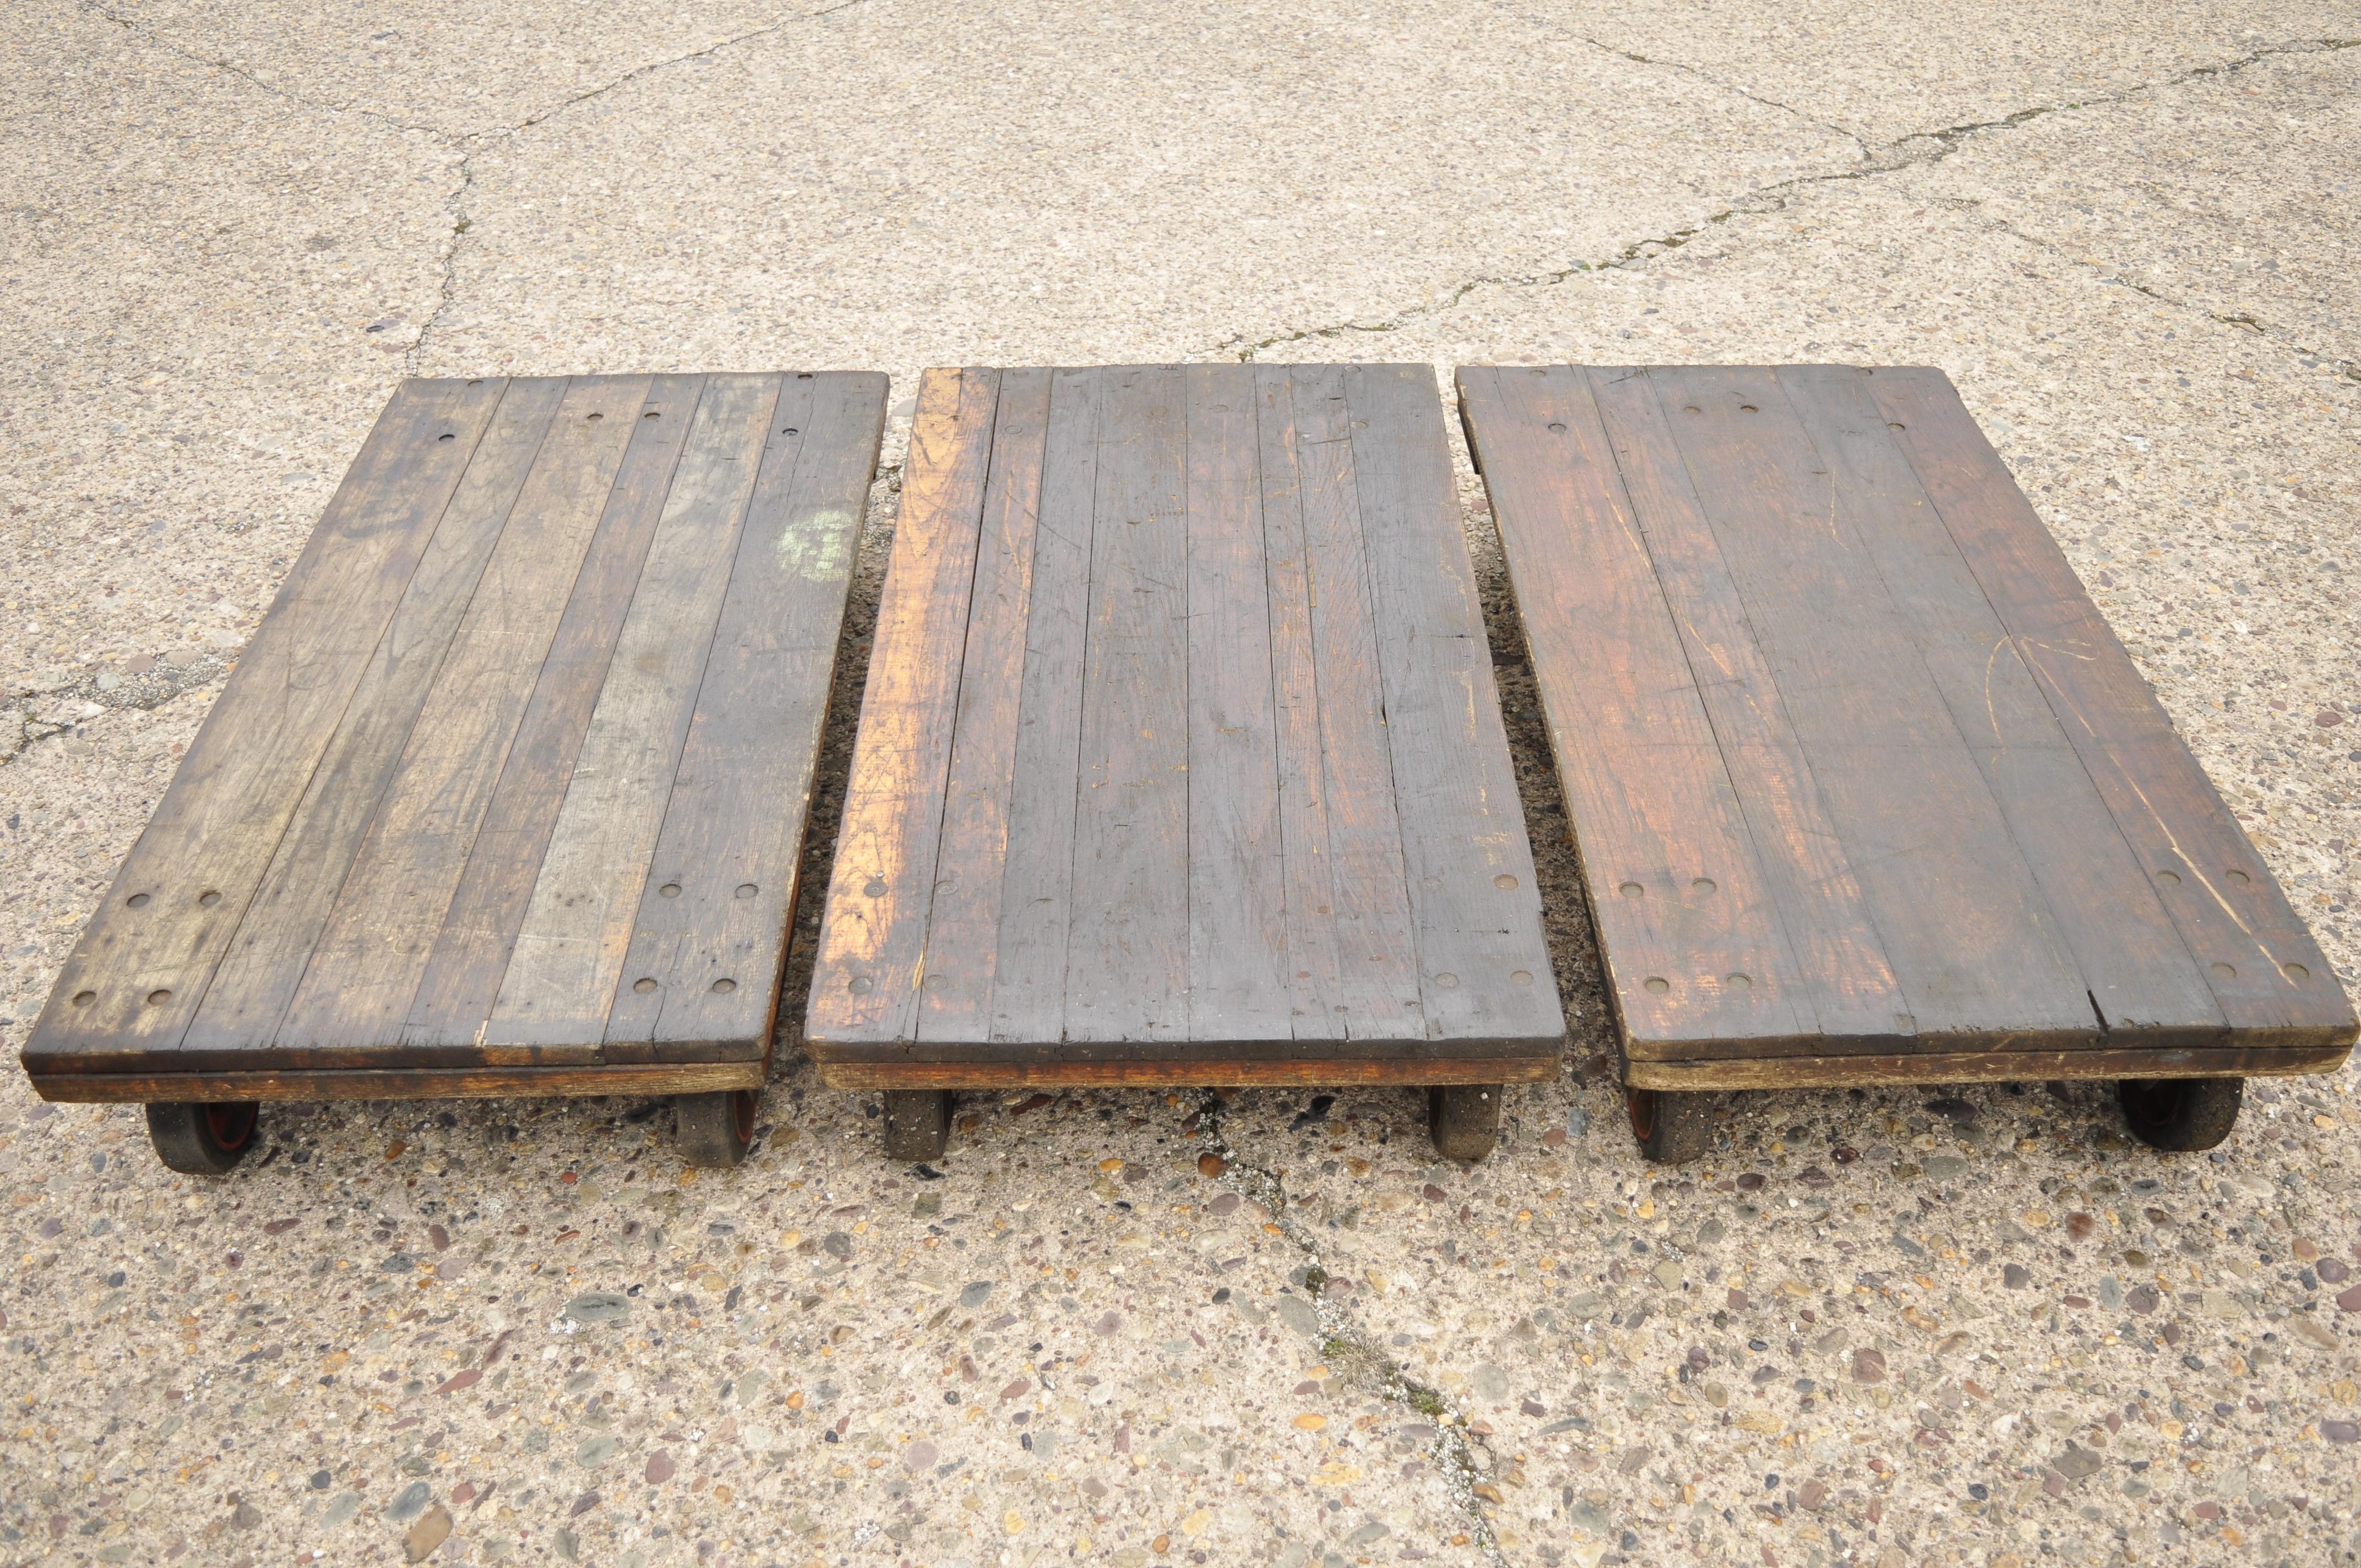 Vintage Fairbanks American Industrial Wood & Iron Factory Work Cart Coffee Table In Good Condition For Sale In Philadelphia, PA